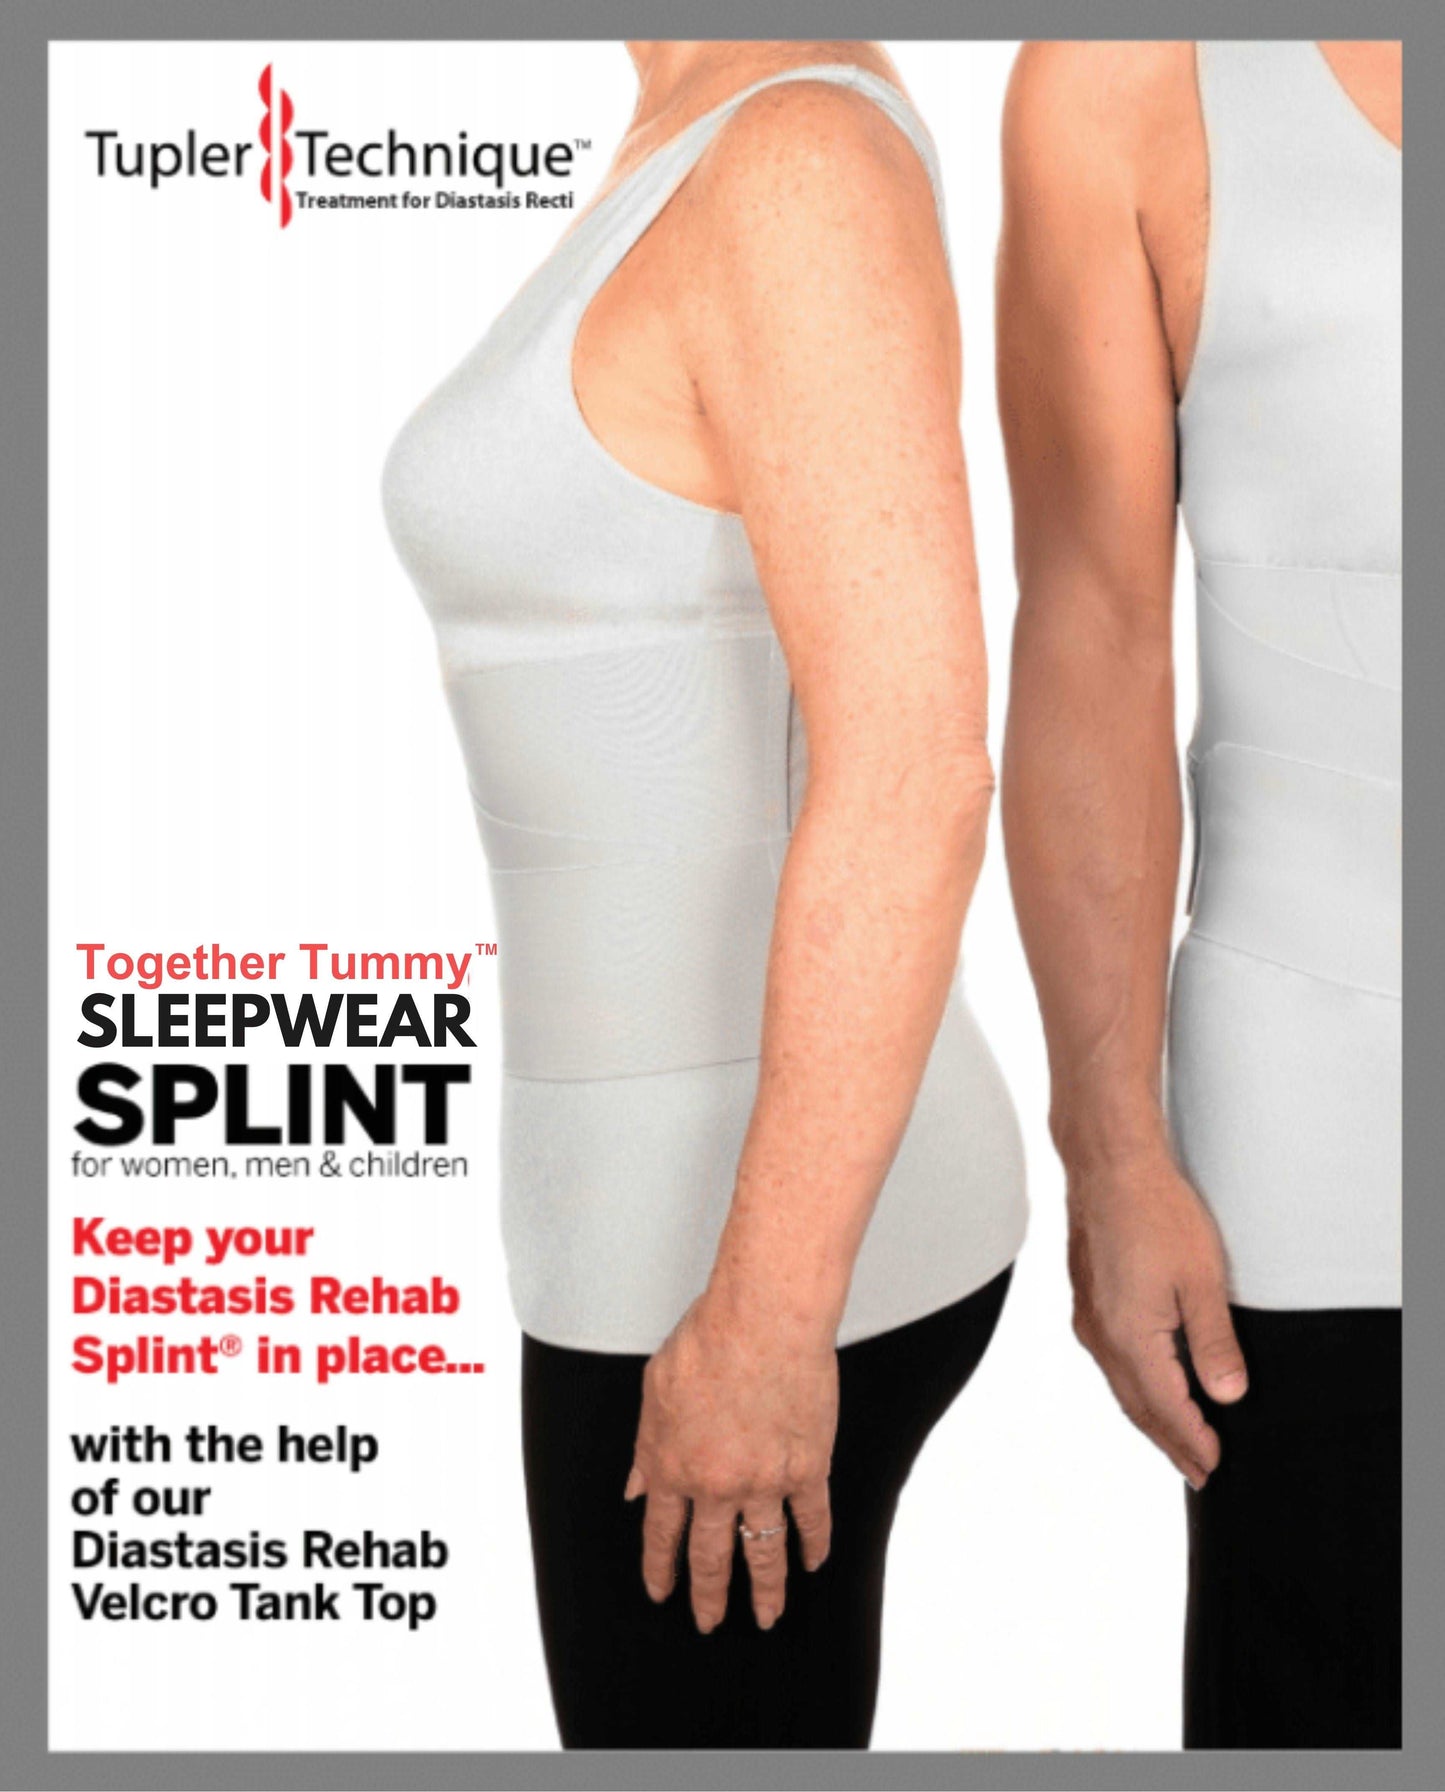 Together Tape™ for Diastasis Recti Healing, Non-Surgical Solution